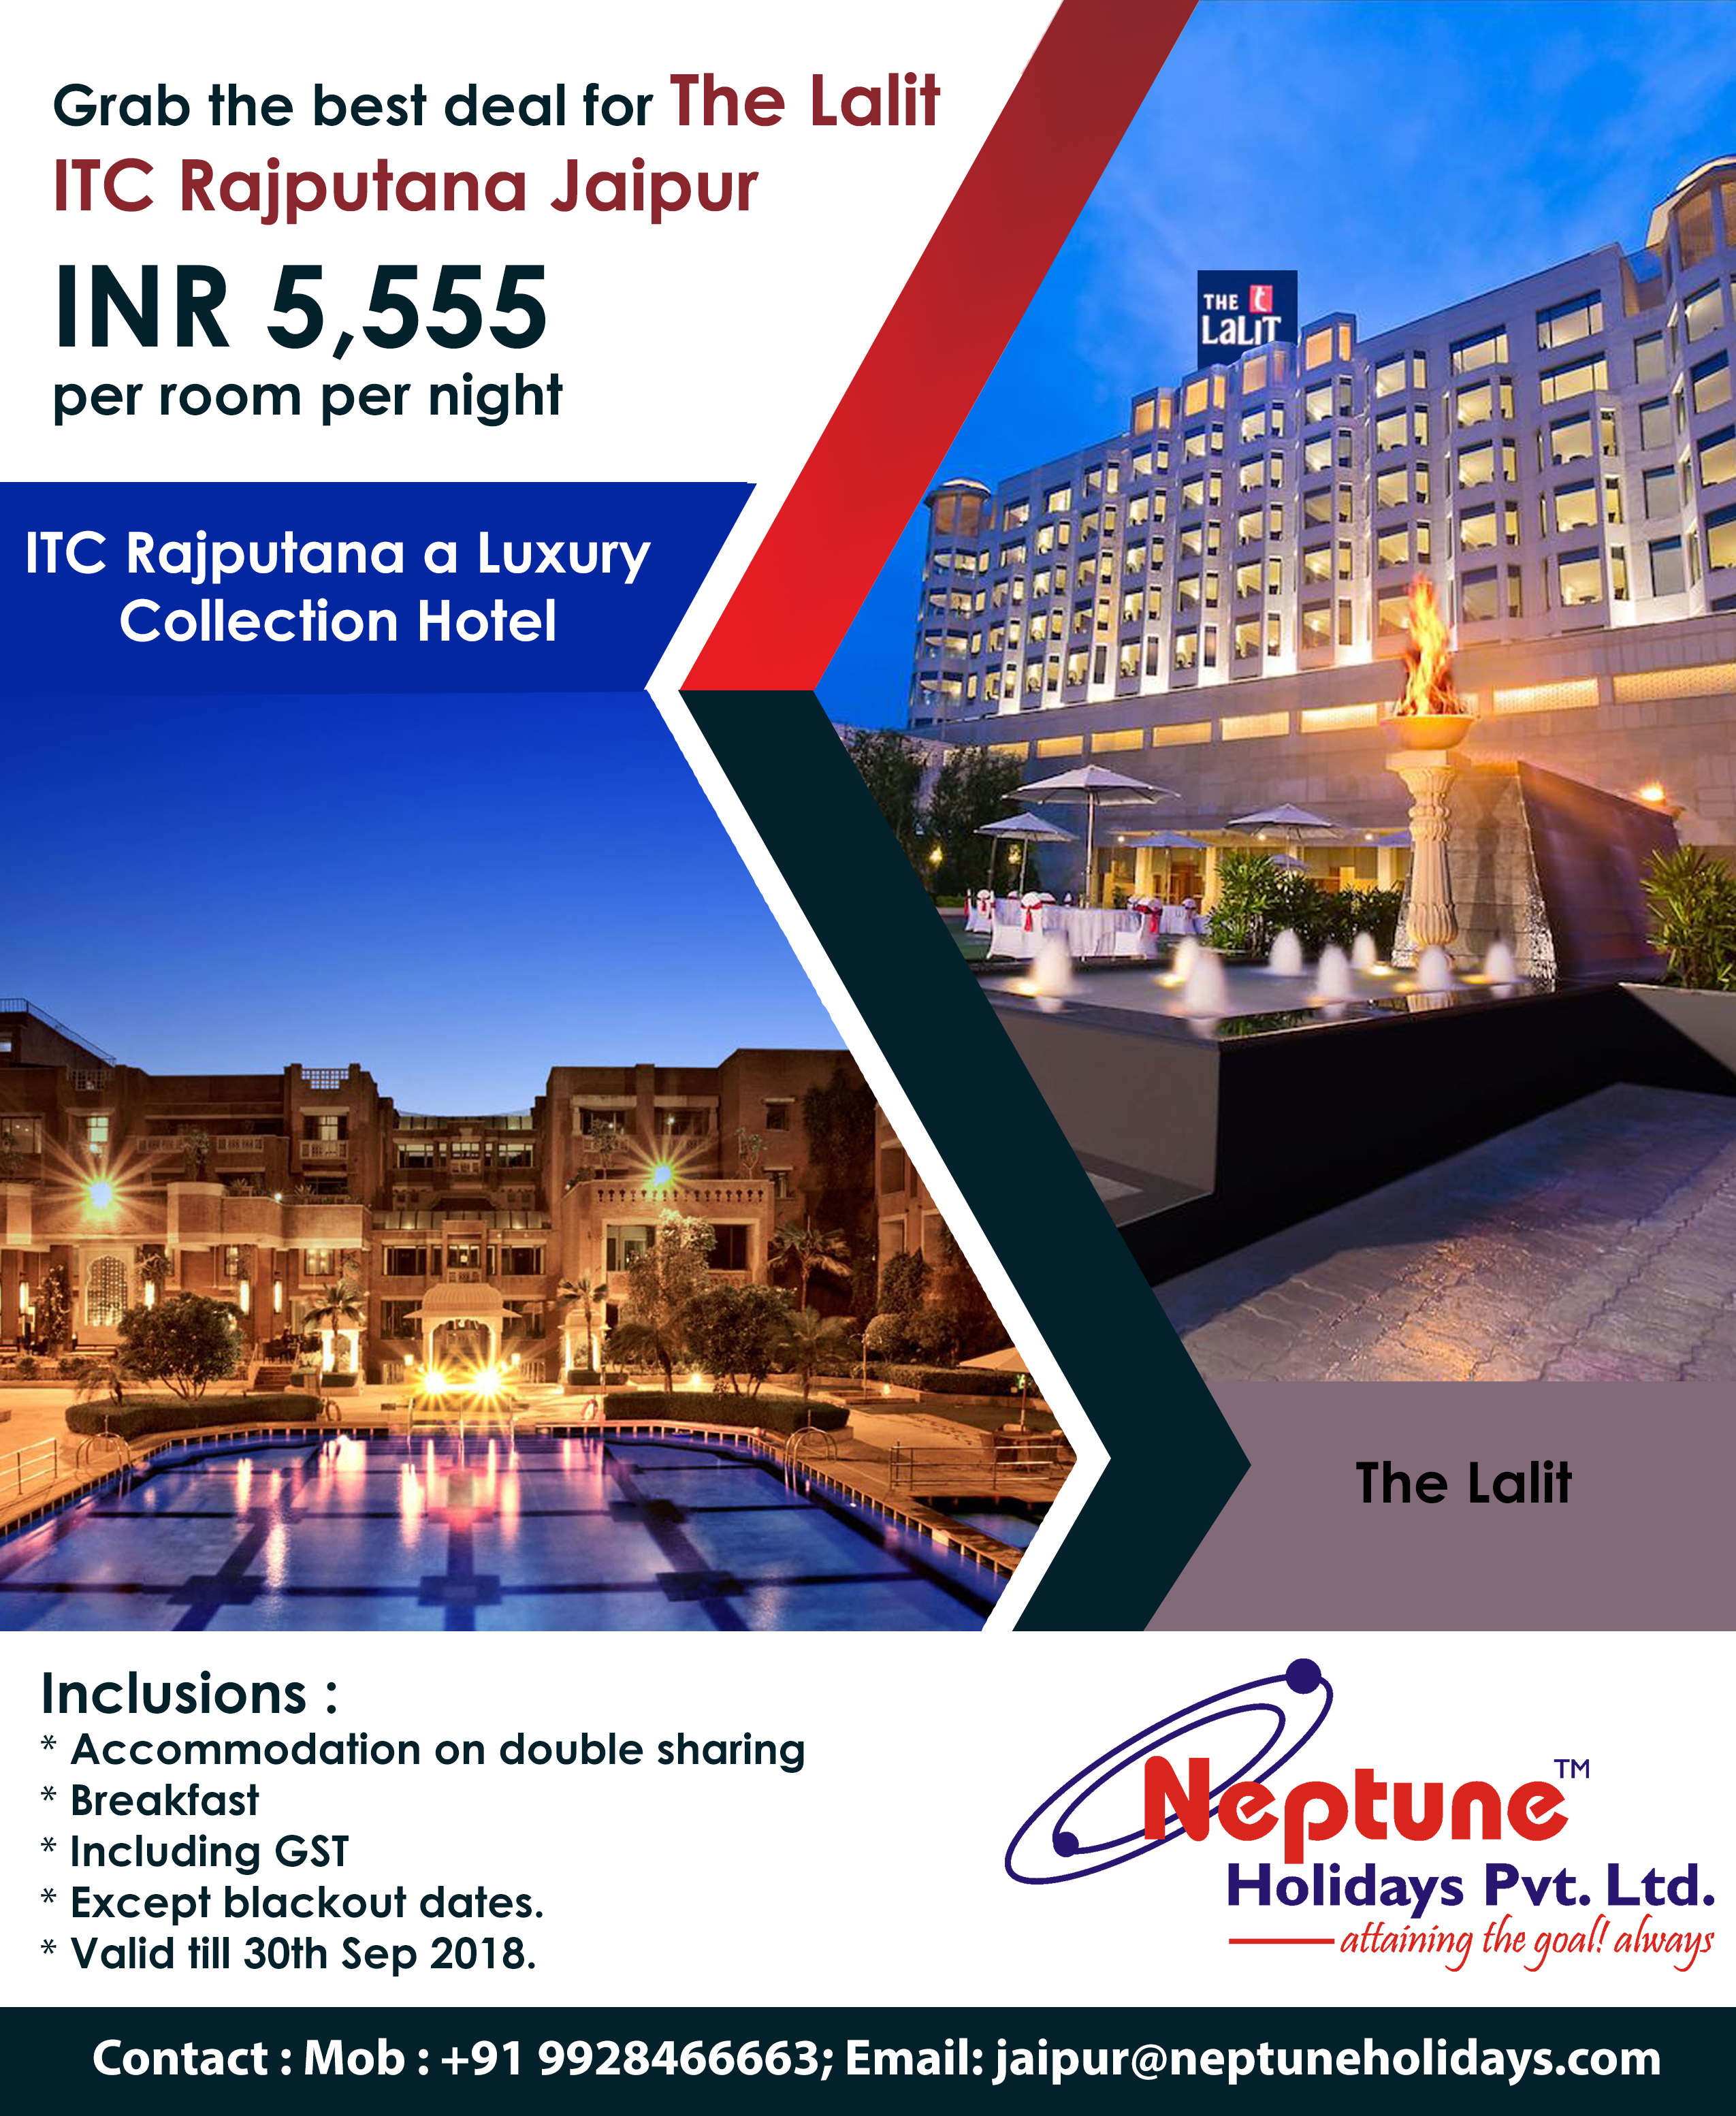 Grab the best deal for The Lalit & ITC Rajputana Jaipur